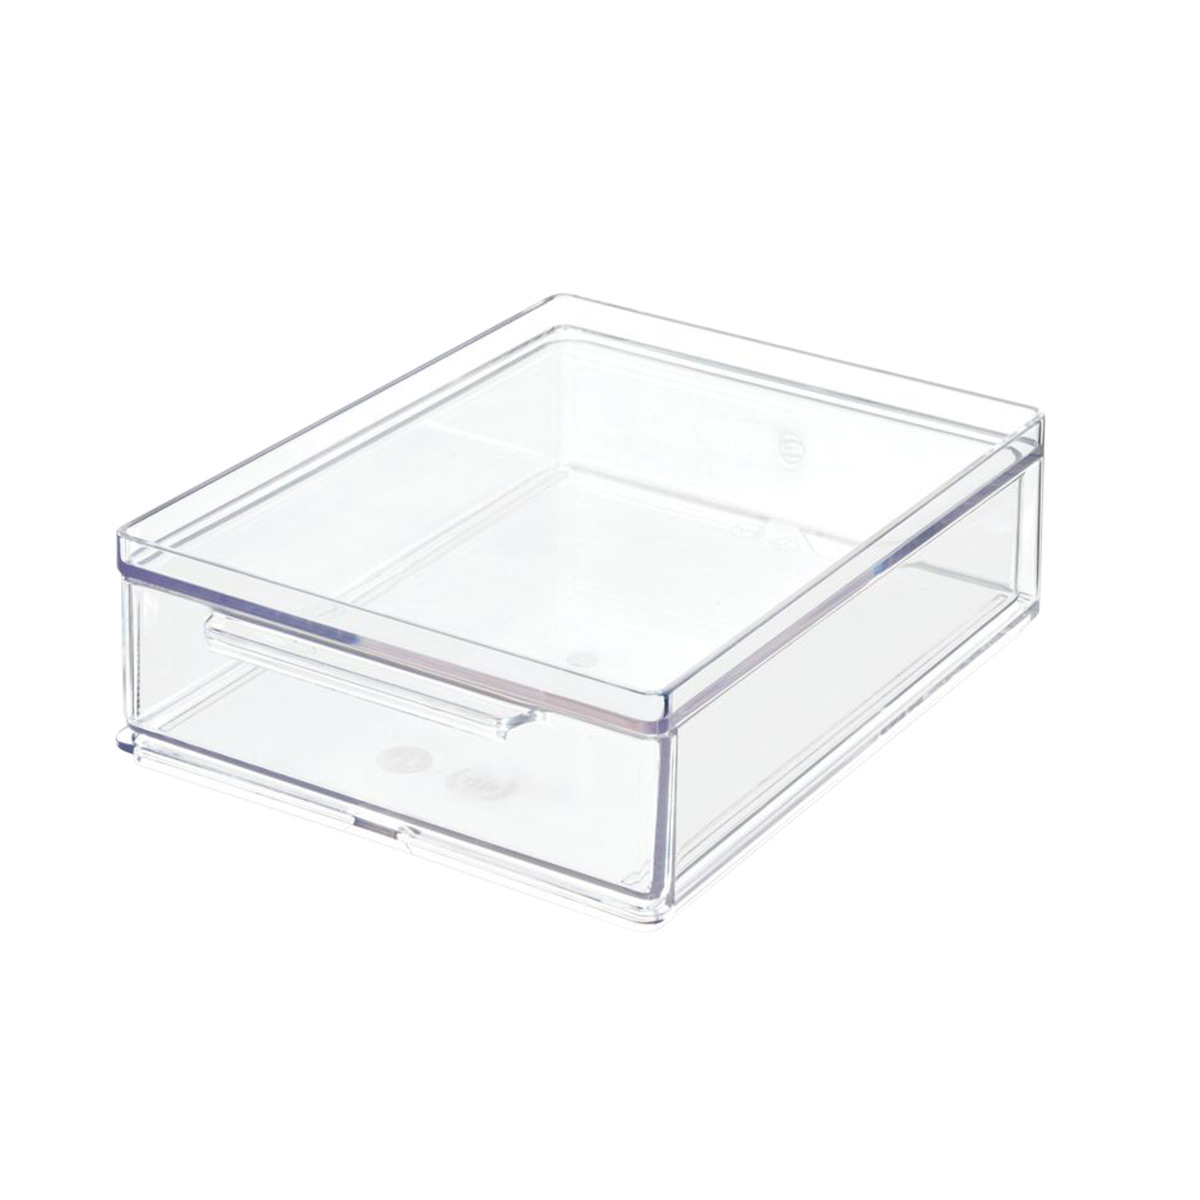 https://www.containerstore.com/catalogimages/392951/10082297-THE-Drawer-Small-Shallow-VE.jpg